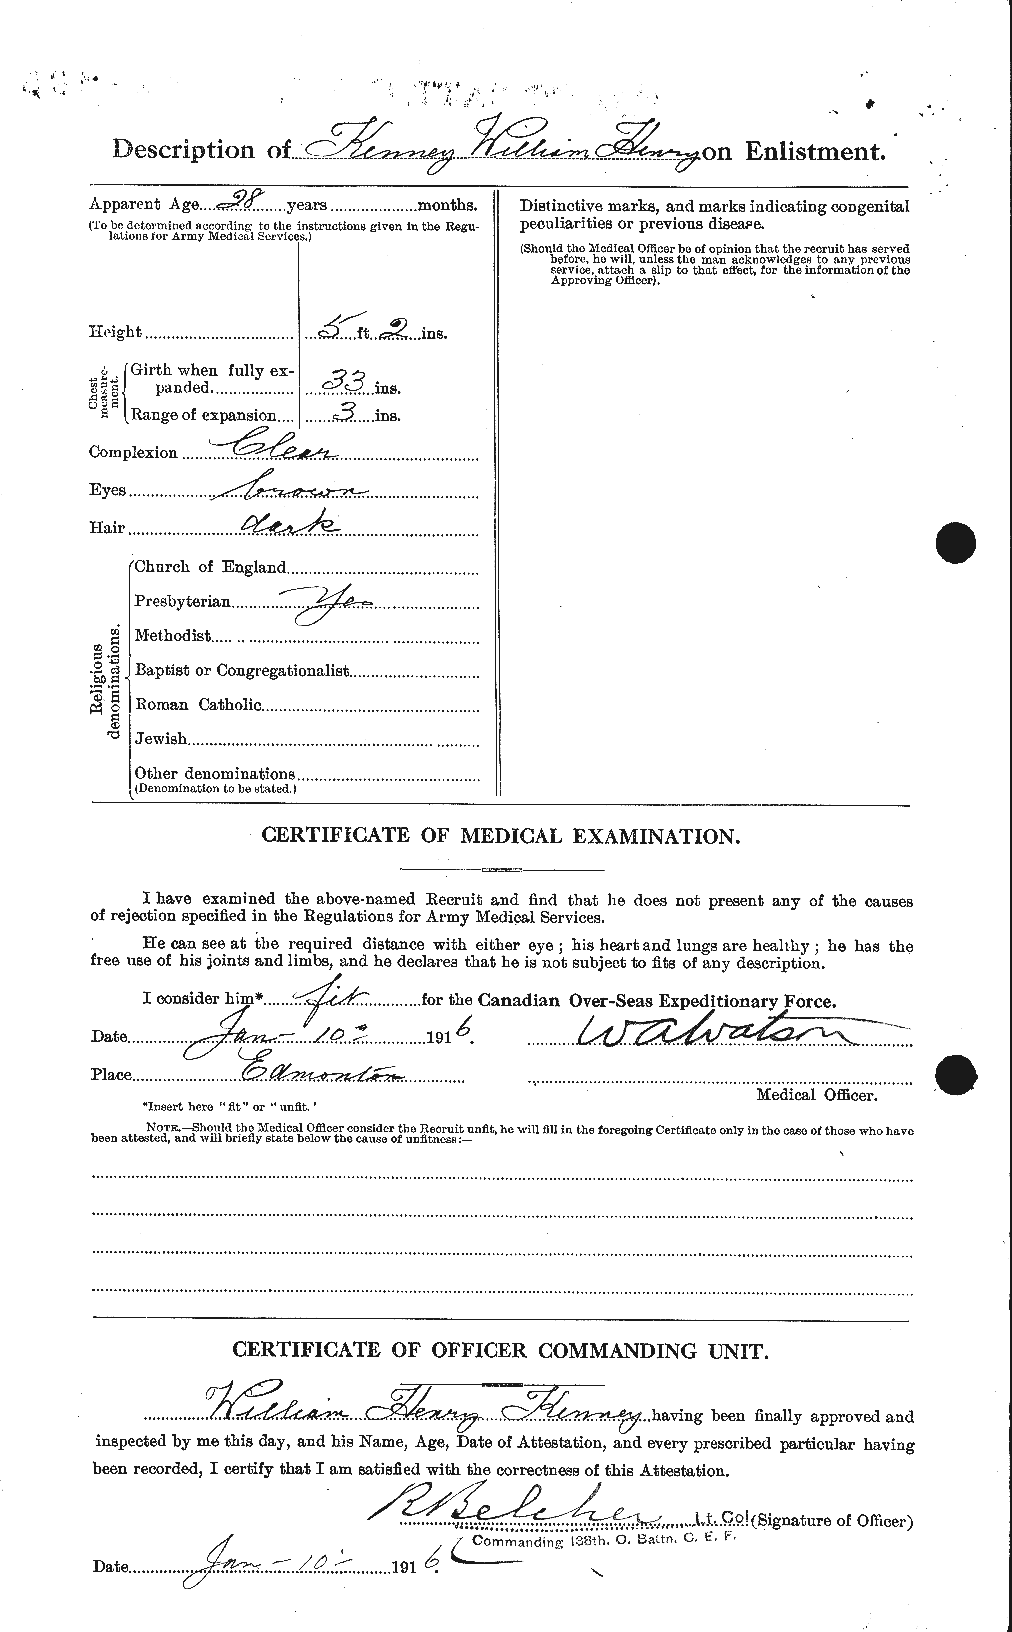 Personnel Records of the First World War - CEF 432965b